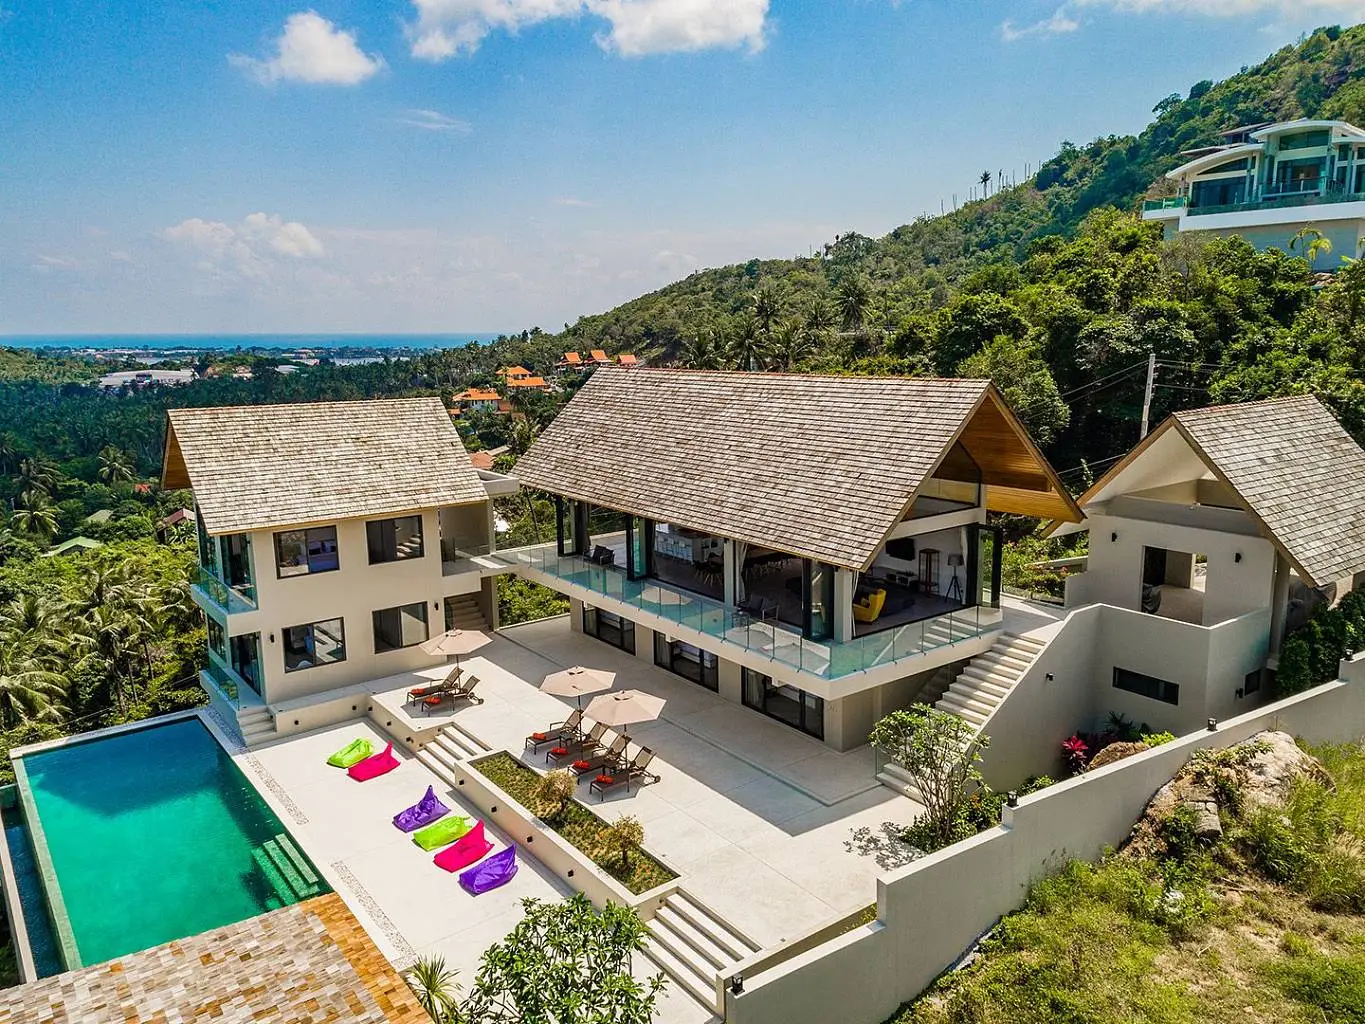 6 bedrooms luxurious panoramic sea view Villa in Bophut: 6 bedrooms luxurious panoramic sea view Villa in Bophut for sale